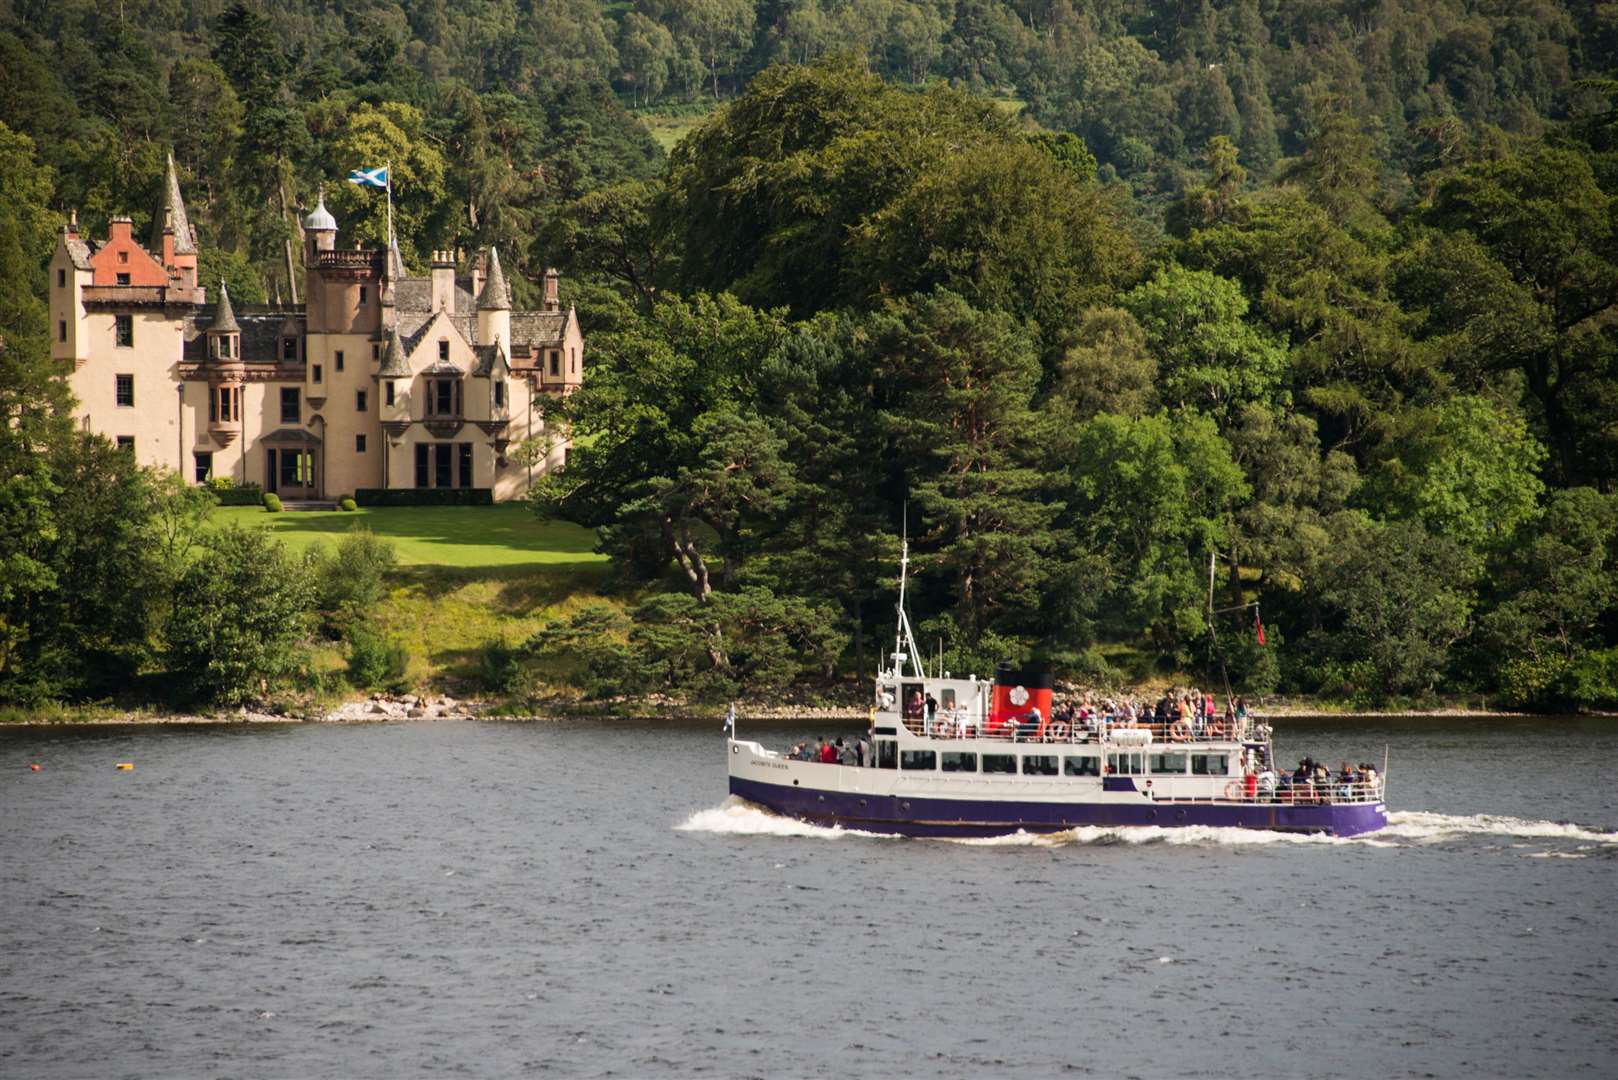 Loch Ness by Jacobite by Aldourie Castle Estate.